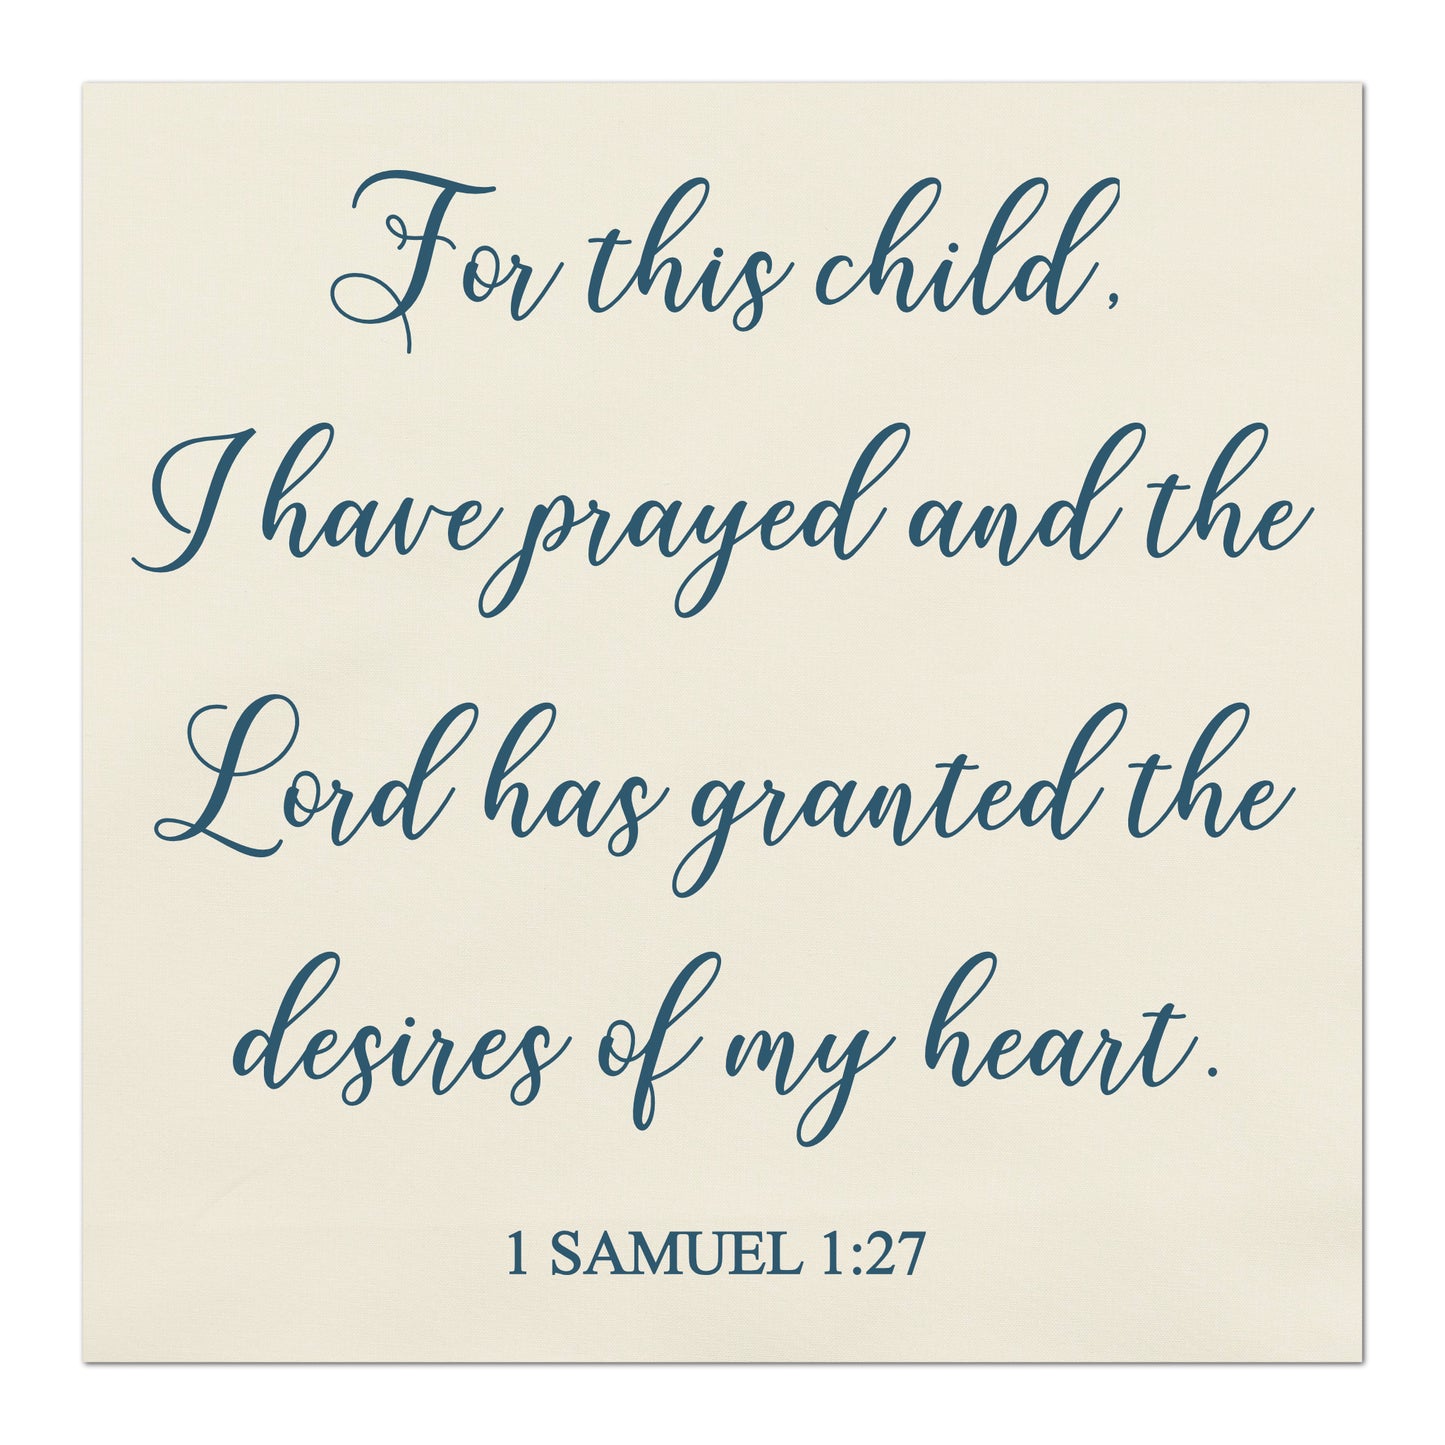 For This Child I Have Prayed, and the Lord has granted the desires of my heart - 1 Samuel 1:27, Bible Verse, Scripture Fabric